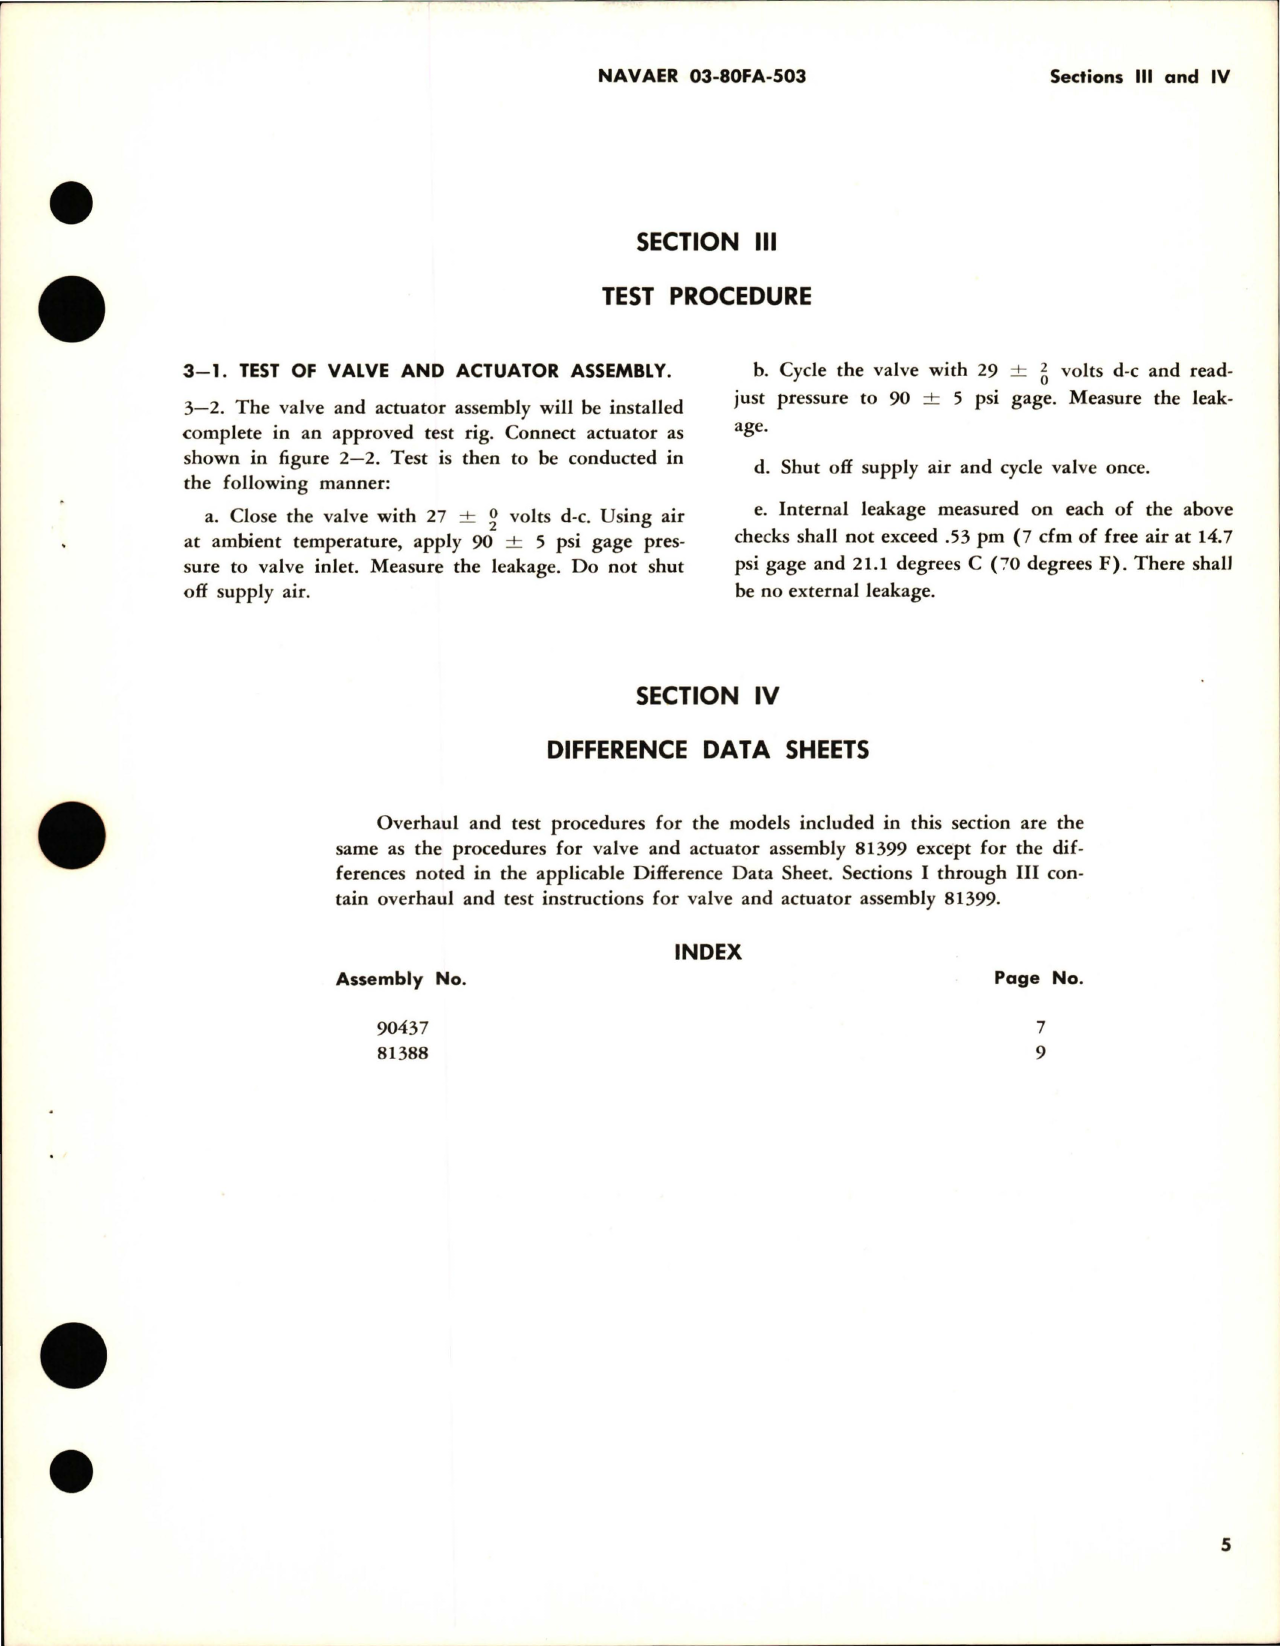 Sample page 9 from AirCorps Library document: Overhaul Instructions for Valve and Actuator Assemblies - Assembly No. 81388, 81399, and 90437